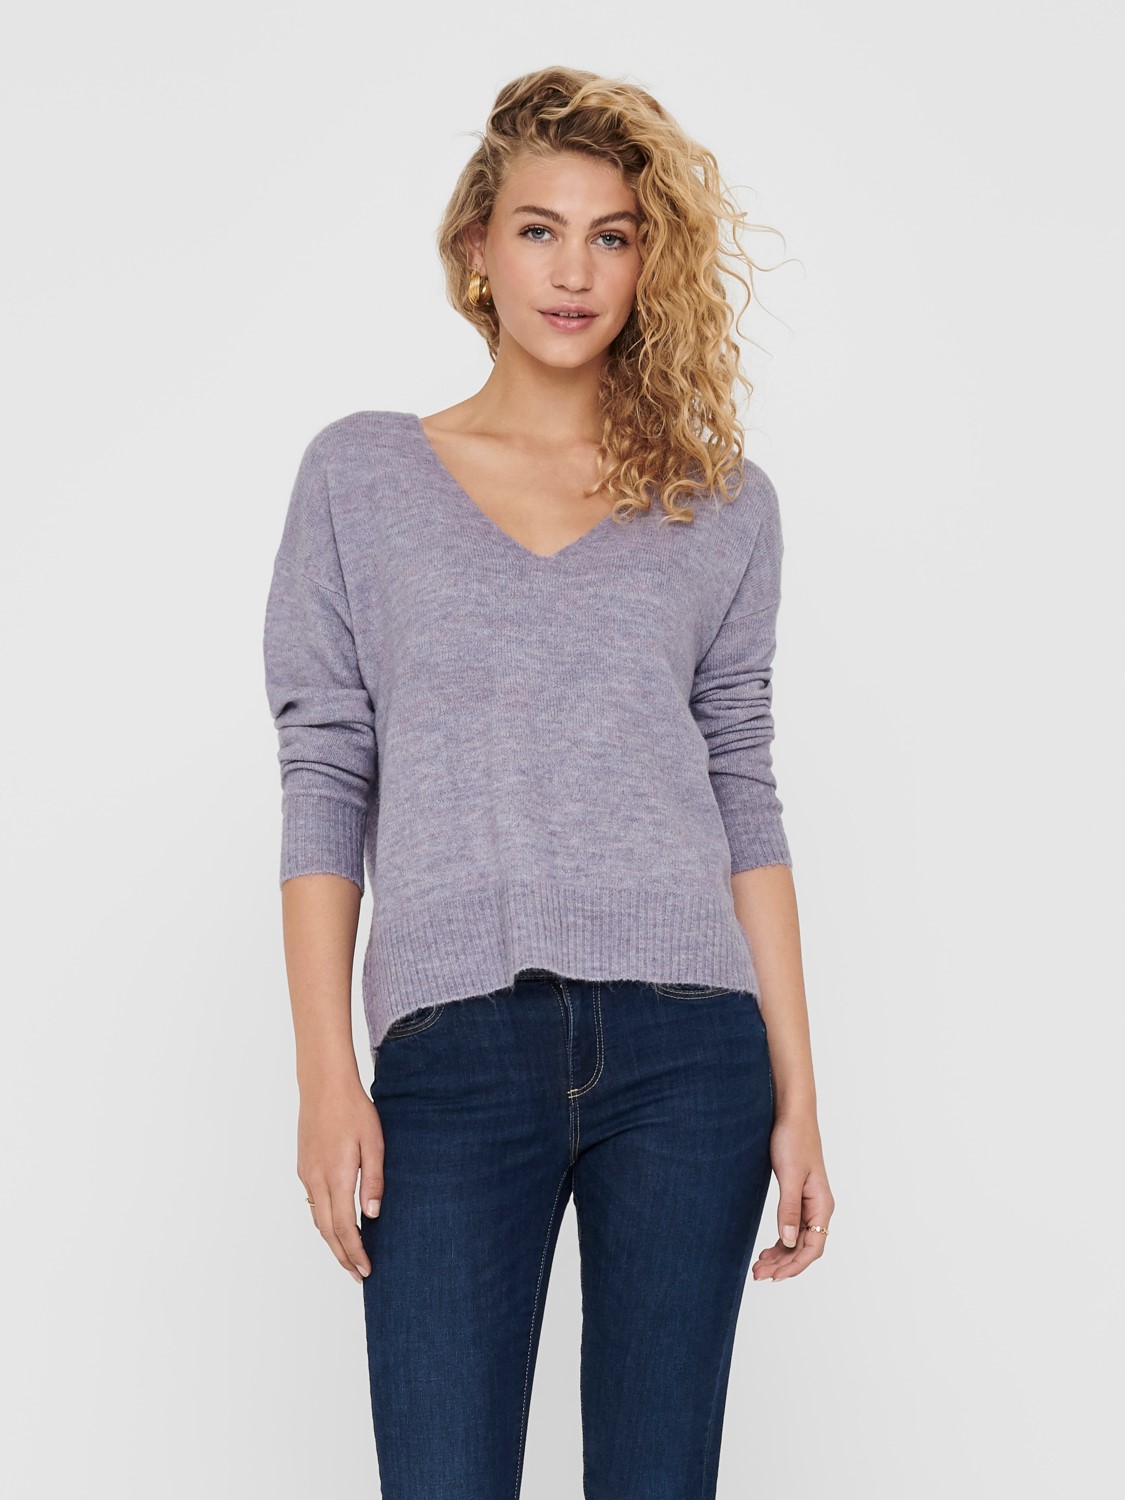 gallery-4317-for-15207823-lavender gray